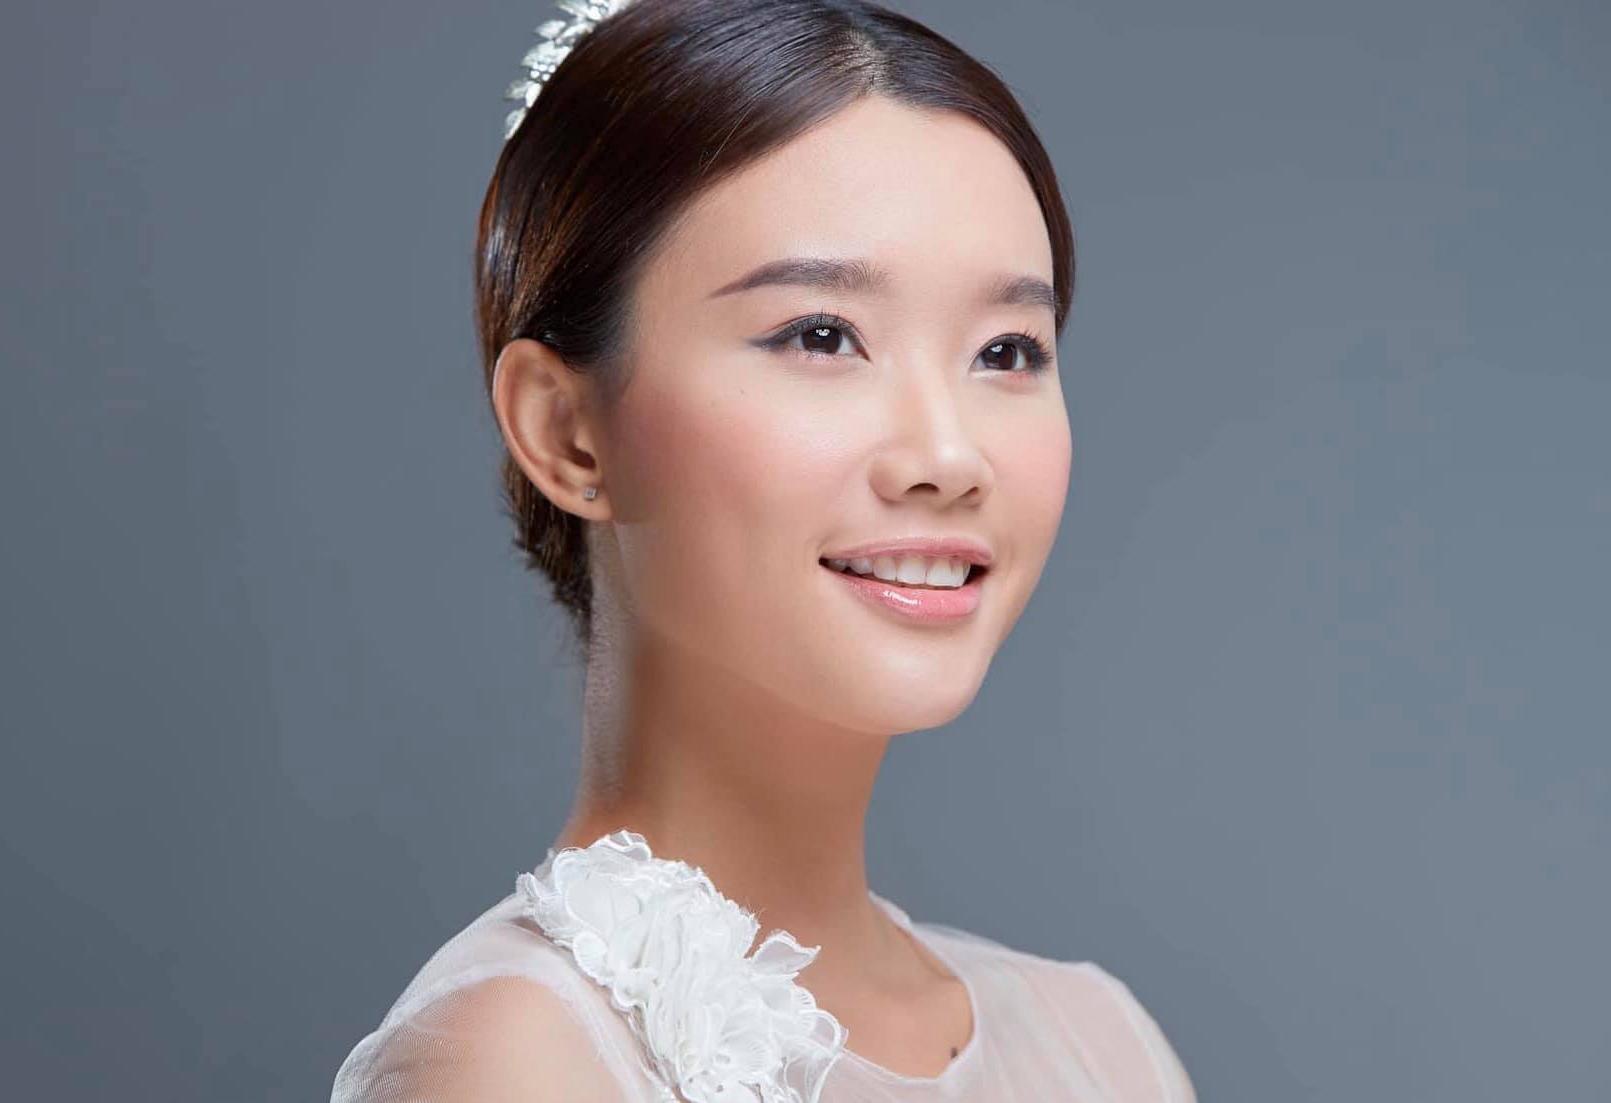  Picture of model Huynh Mai Cat Tien is beautiful and radiant